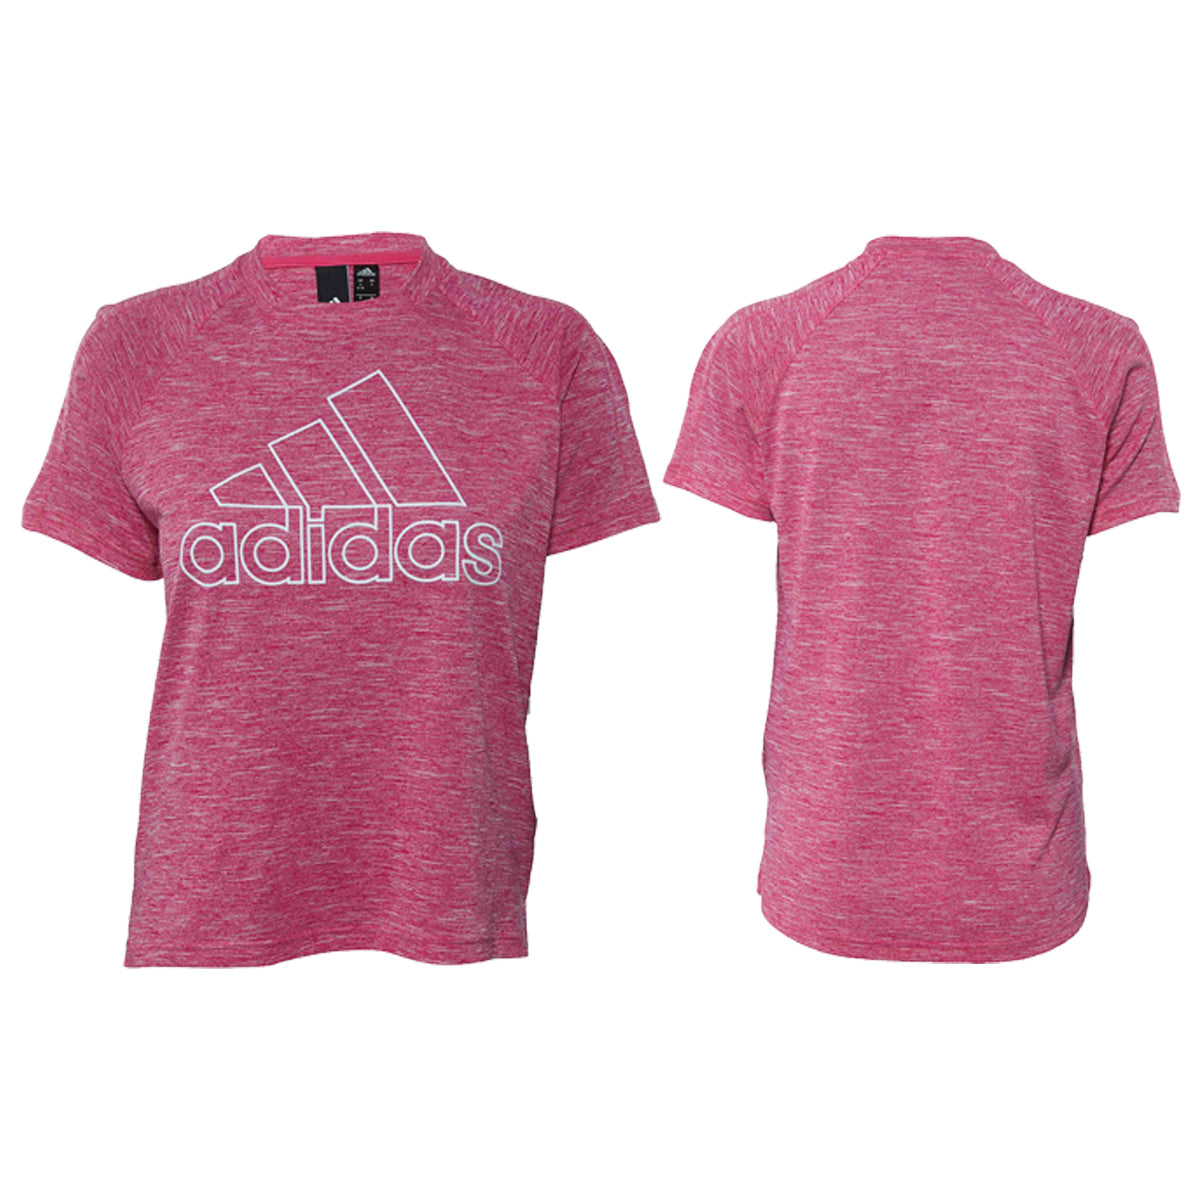 Adidas S2s Prize T2 Womens Style : Dx0708